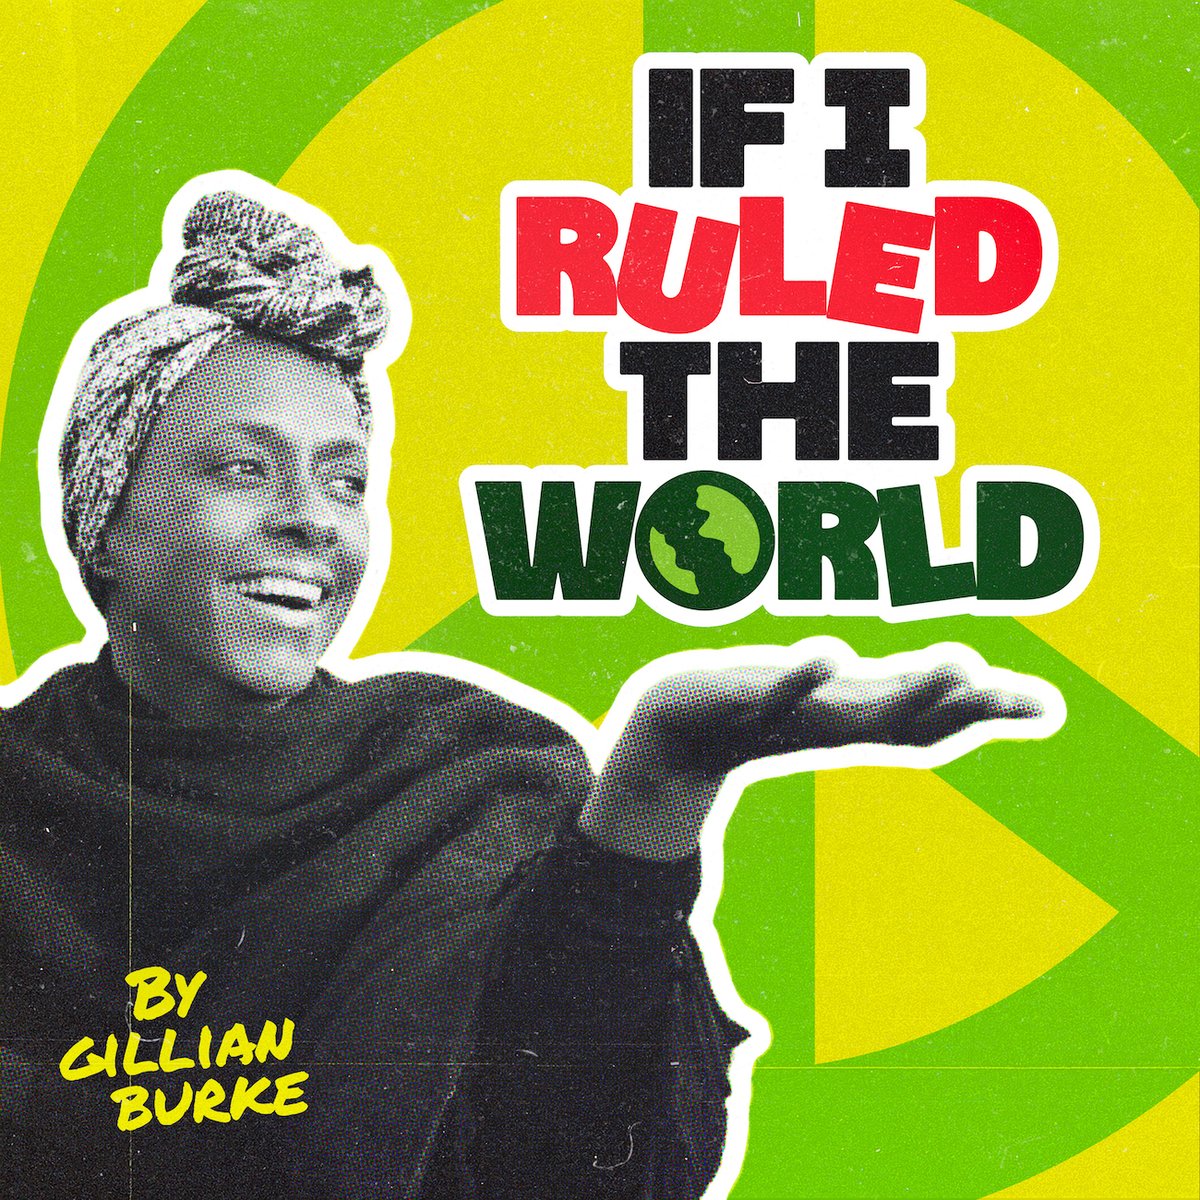 Have you heard? Wildlife presenter and Triodos customer, Gillian Burke, has launched a podcast which explores themes of positive change with expert guests. ‘If I Ruled The World’ is sponsored by Triodos Bank and is available to listen on Spotify and Apple Music now 🎙